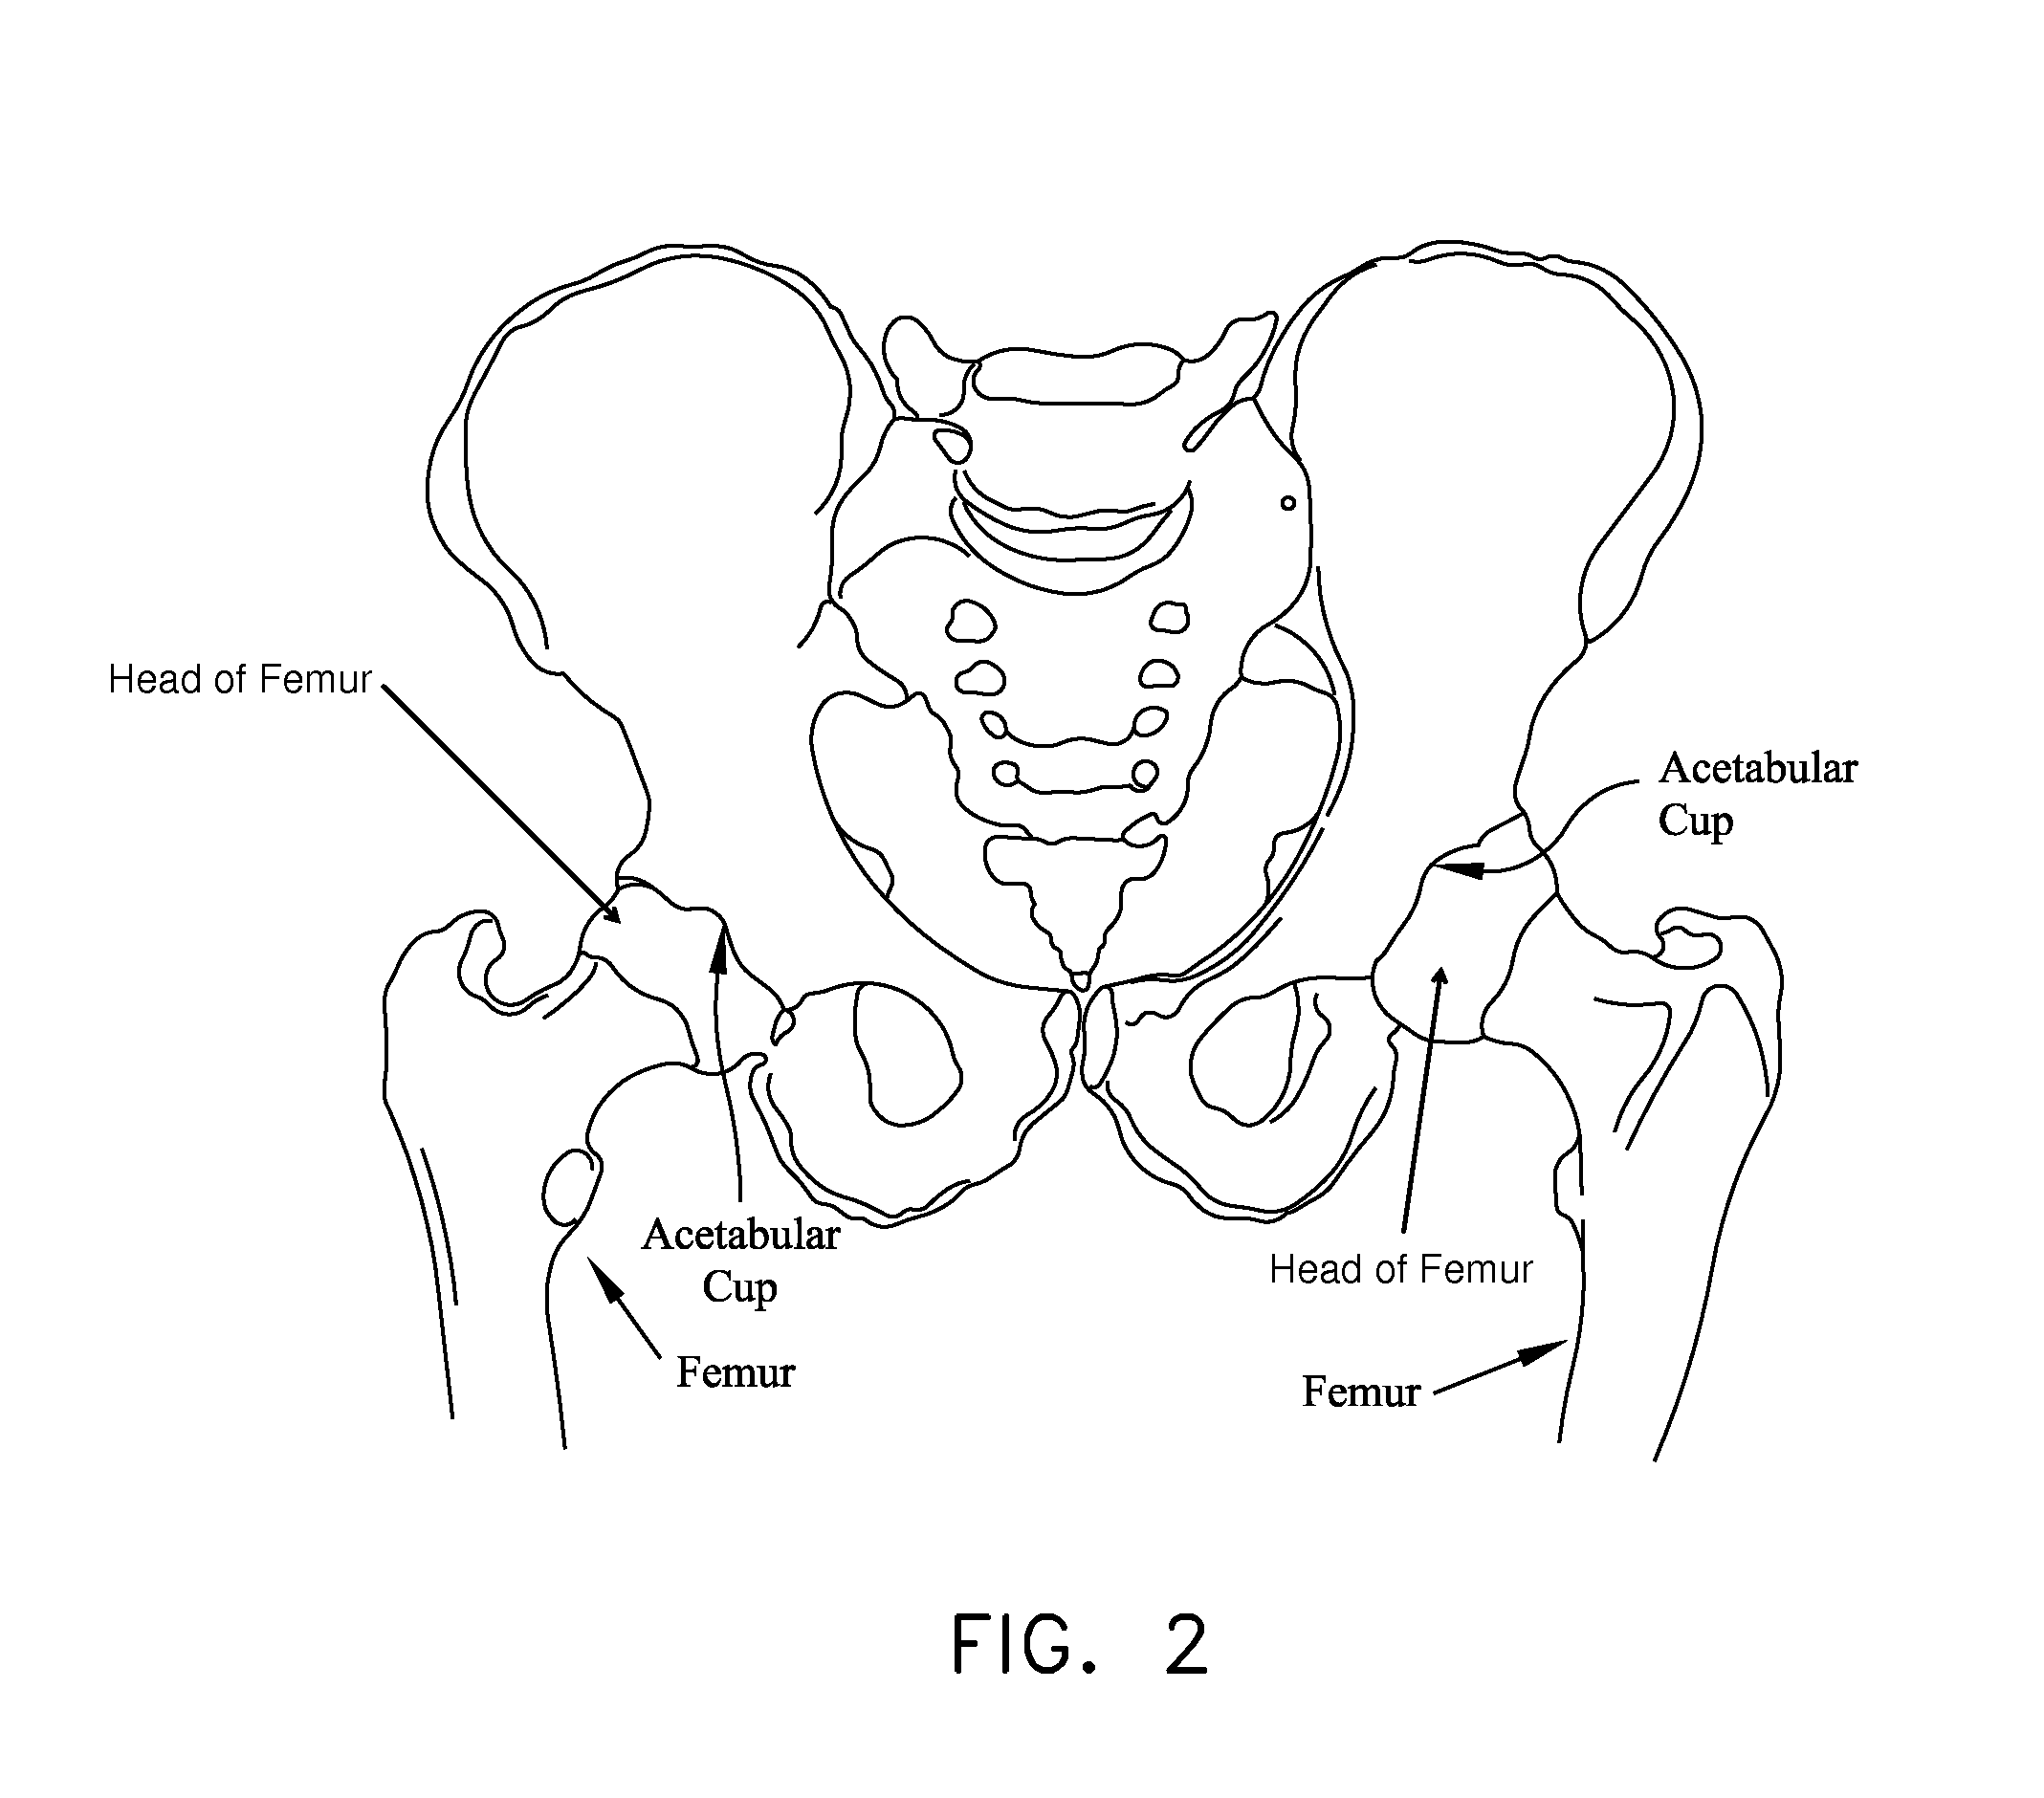 Method and apparatus for attaching tissue to bone, including the provision and use of a novel knotless suture anchor system, including a novel locking element